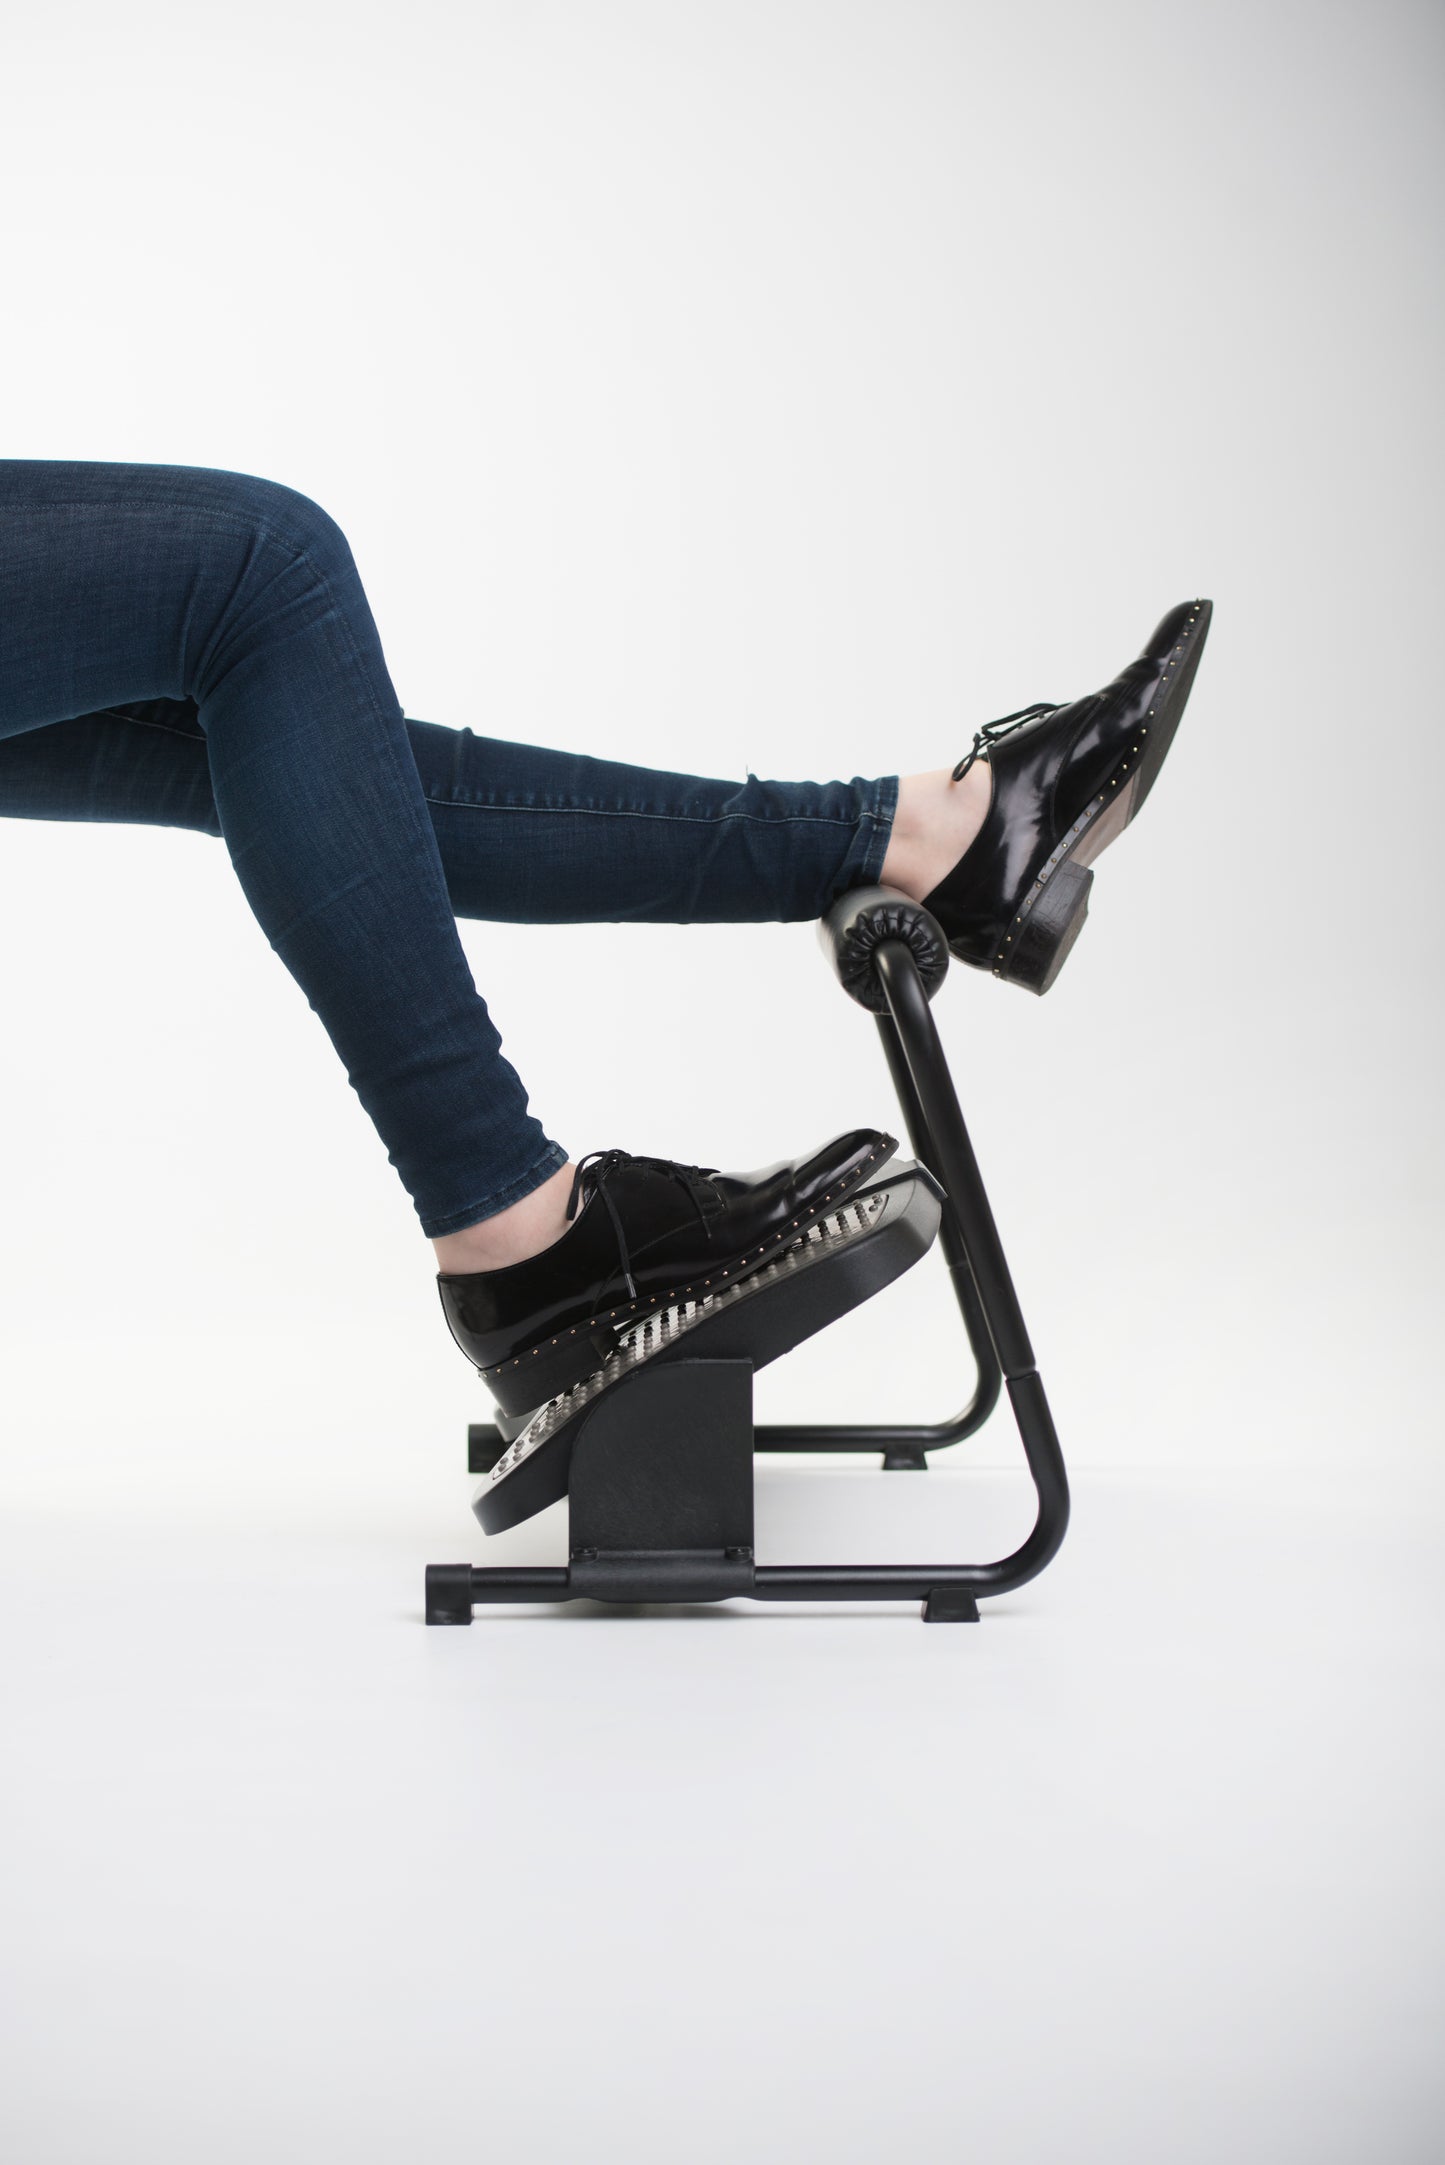 RELAX ERGO FOOT - Footrest for too high workstation - optimal solution - promotes a natural sitting posture - for every office worker